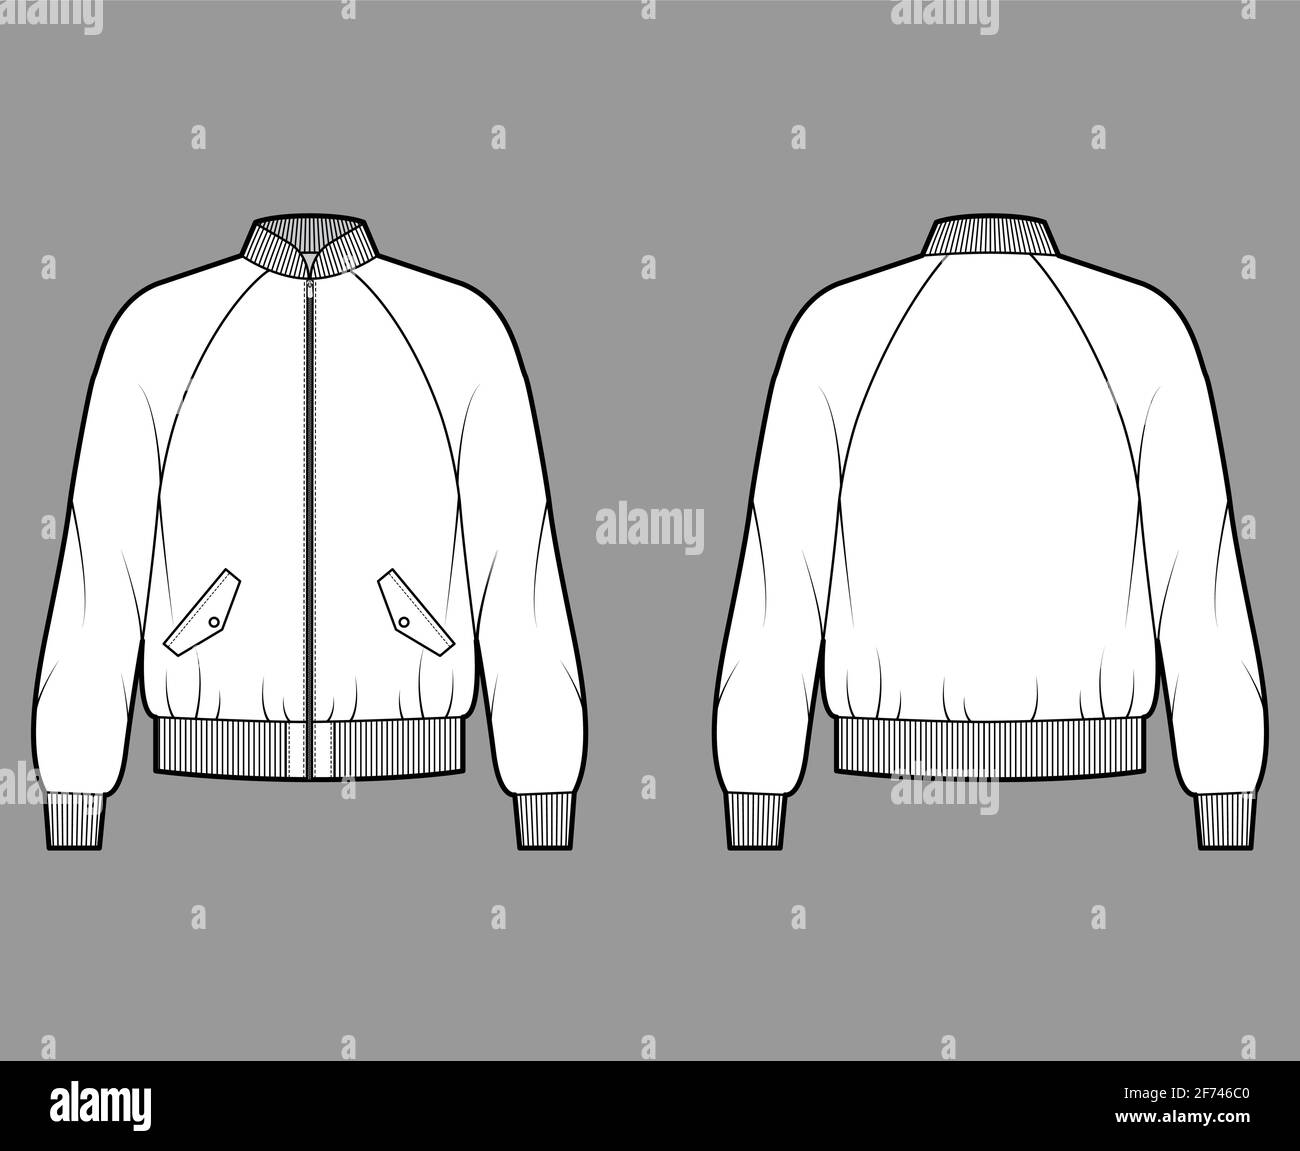 Zip-up Bomber ma-1 flight jacket technical fashion illustration with Rib collar, cuffs, long raglan sleeves, flap pockets. Flat coat template front, back white color. Women men unisex top CAD mockup Stock Vector